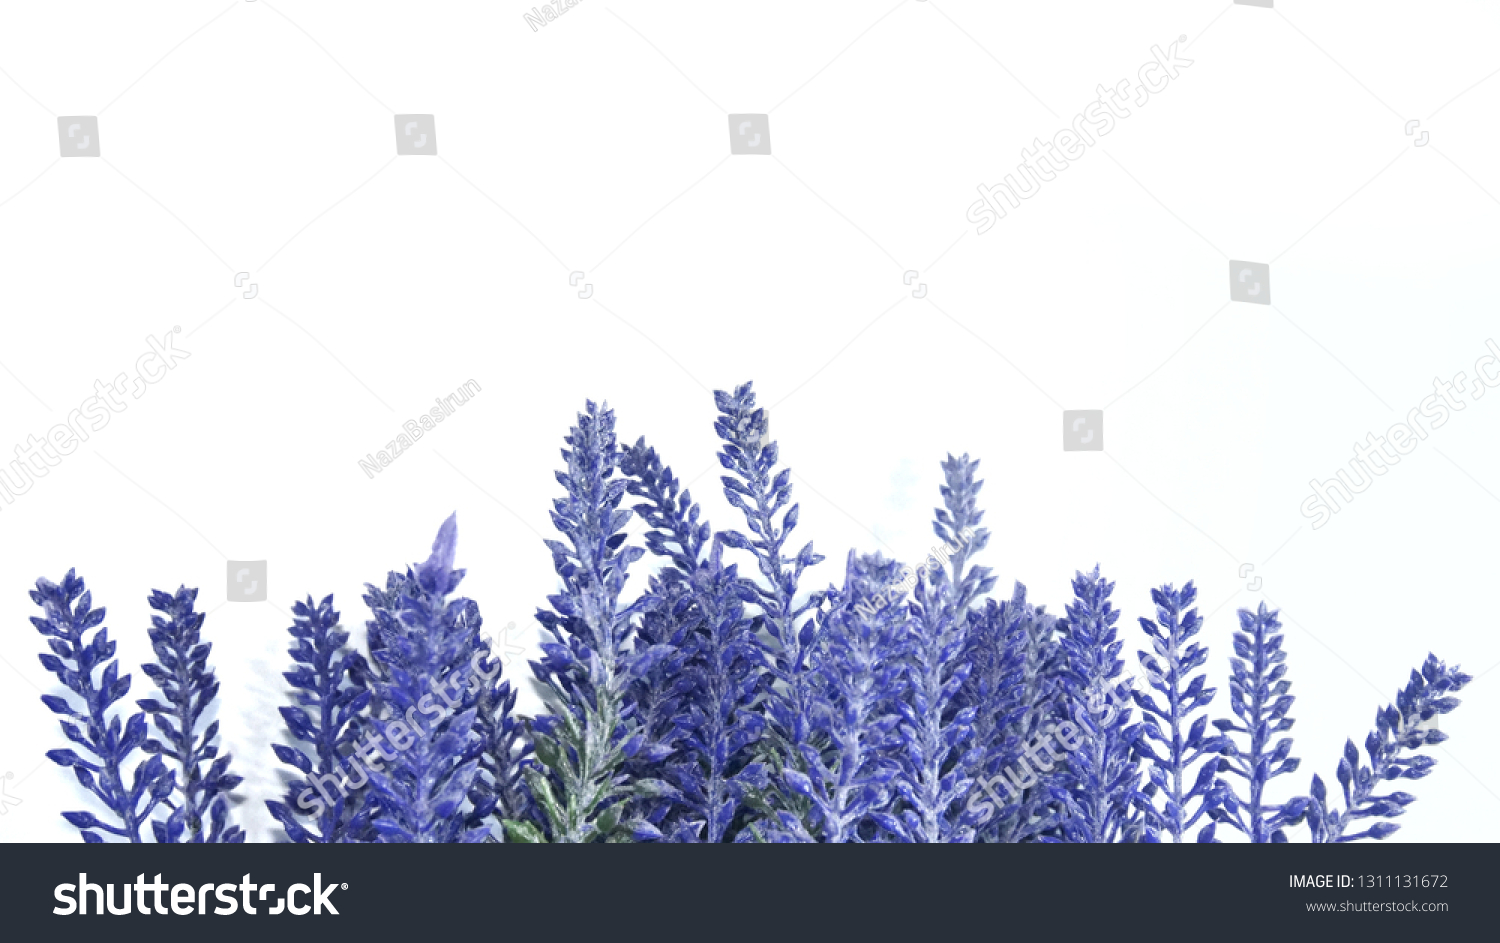 Lavender isolated on white background - copy space for editing #1311131672